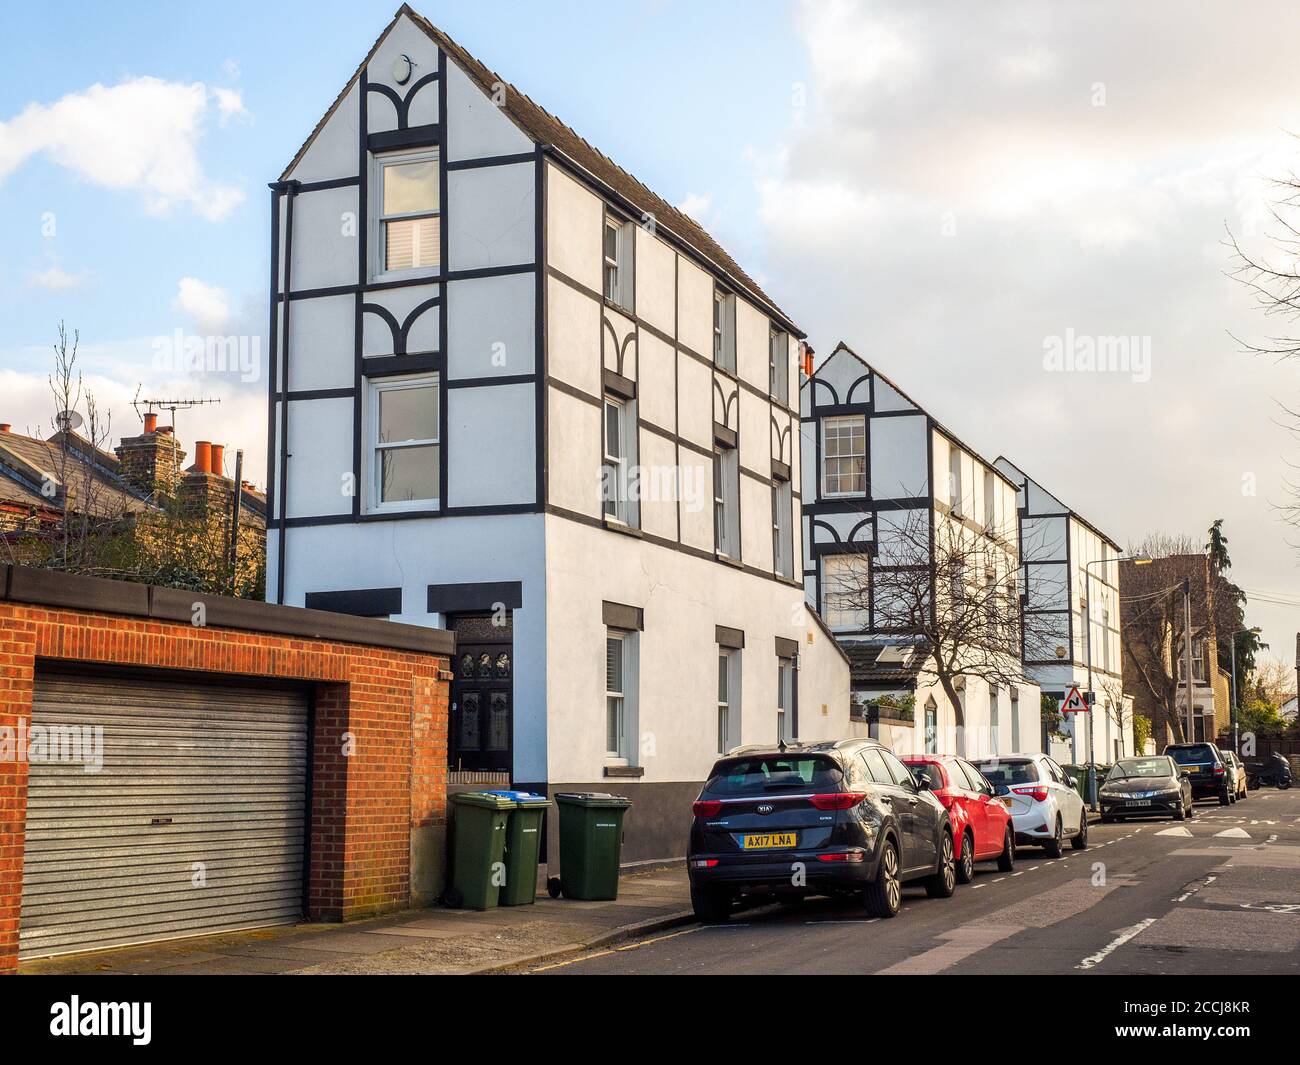 Craigerne Rd House in Charlton - South East London, England Stockfoto